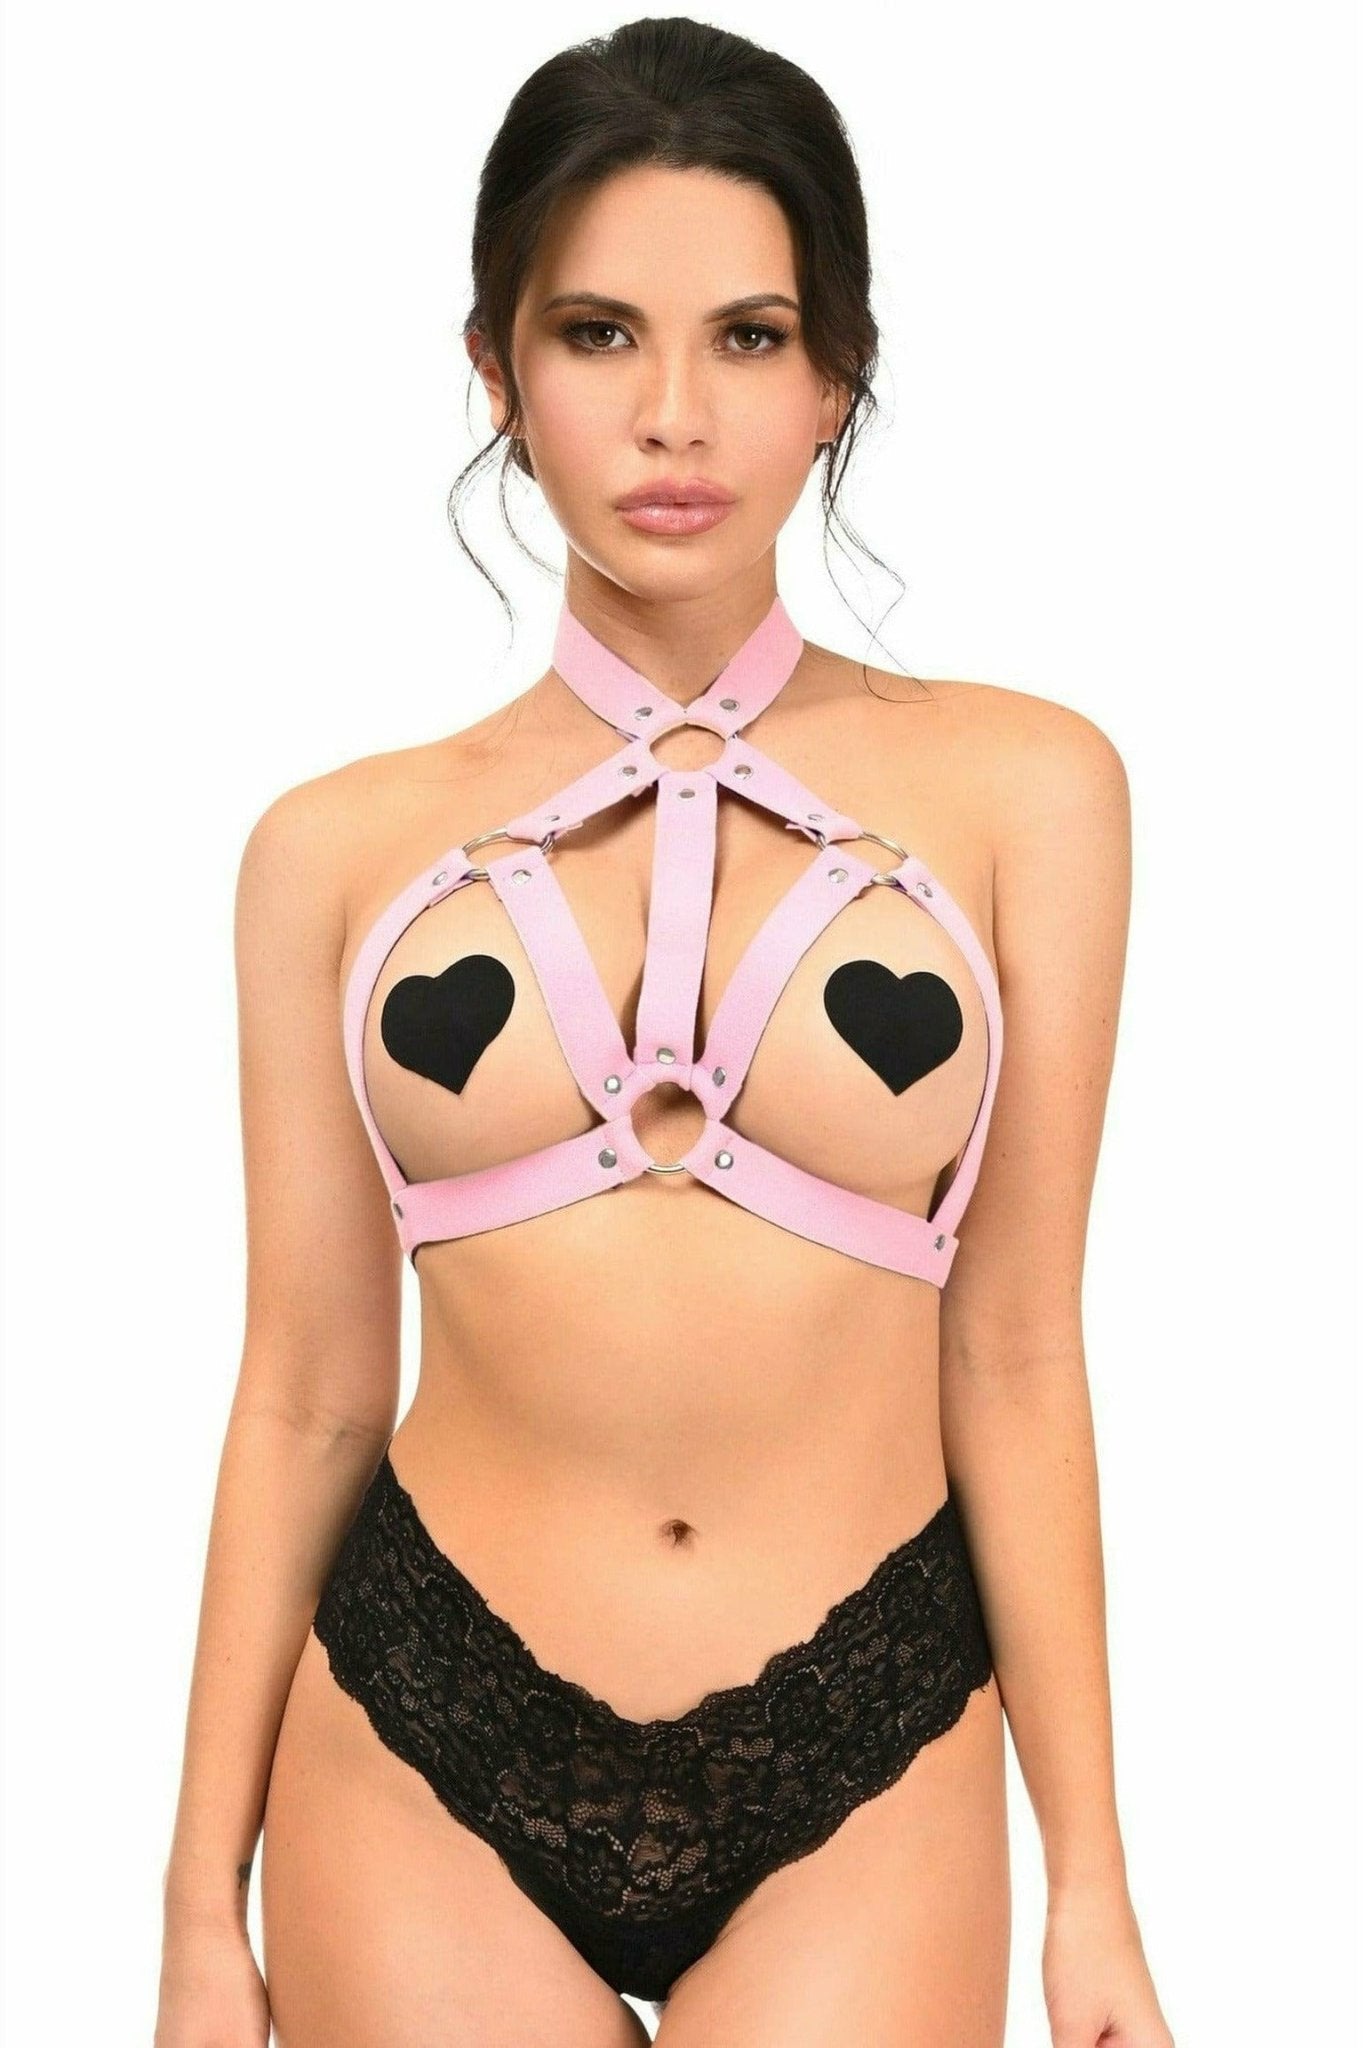 Light Pink Stretchy Body Harness with Silver Hardware Musotica.com